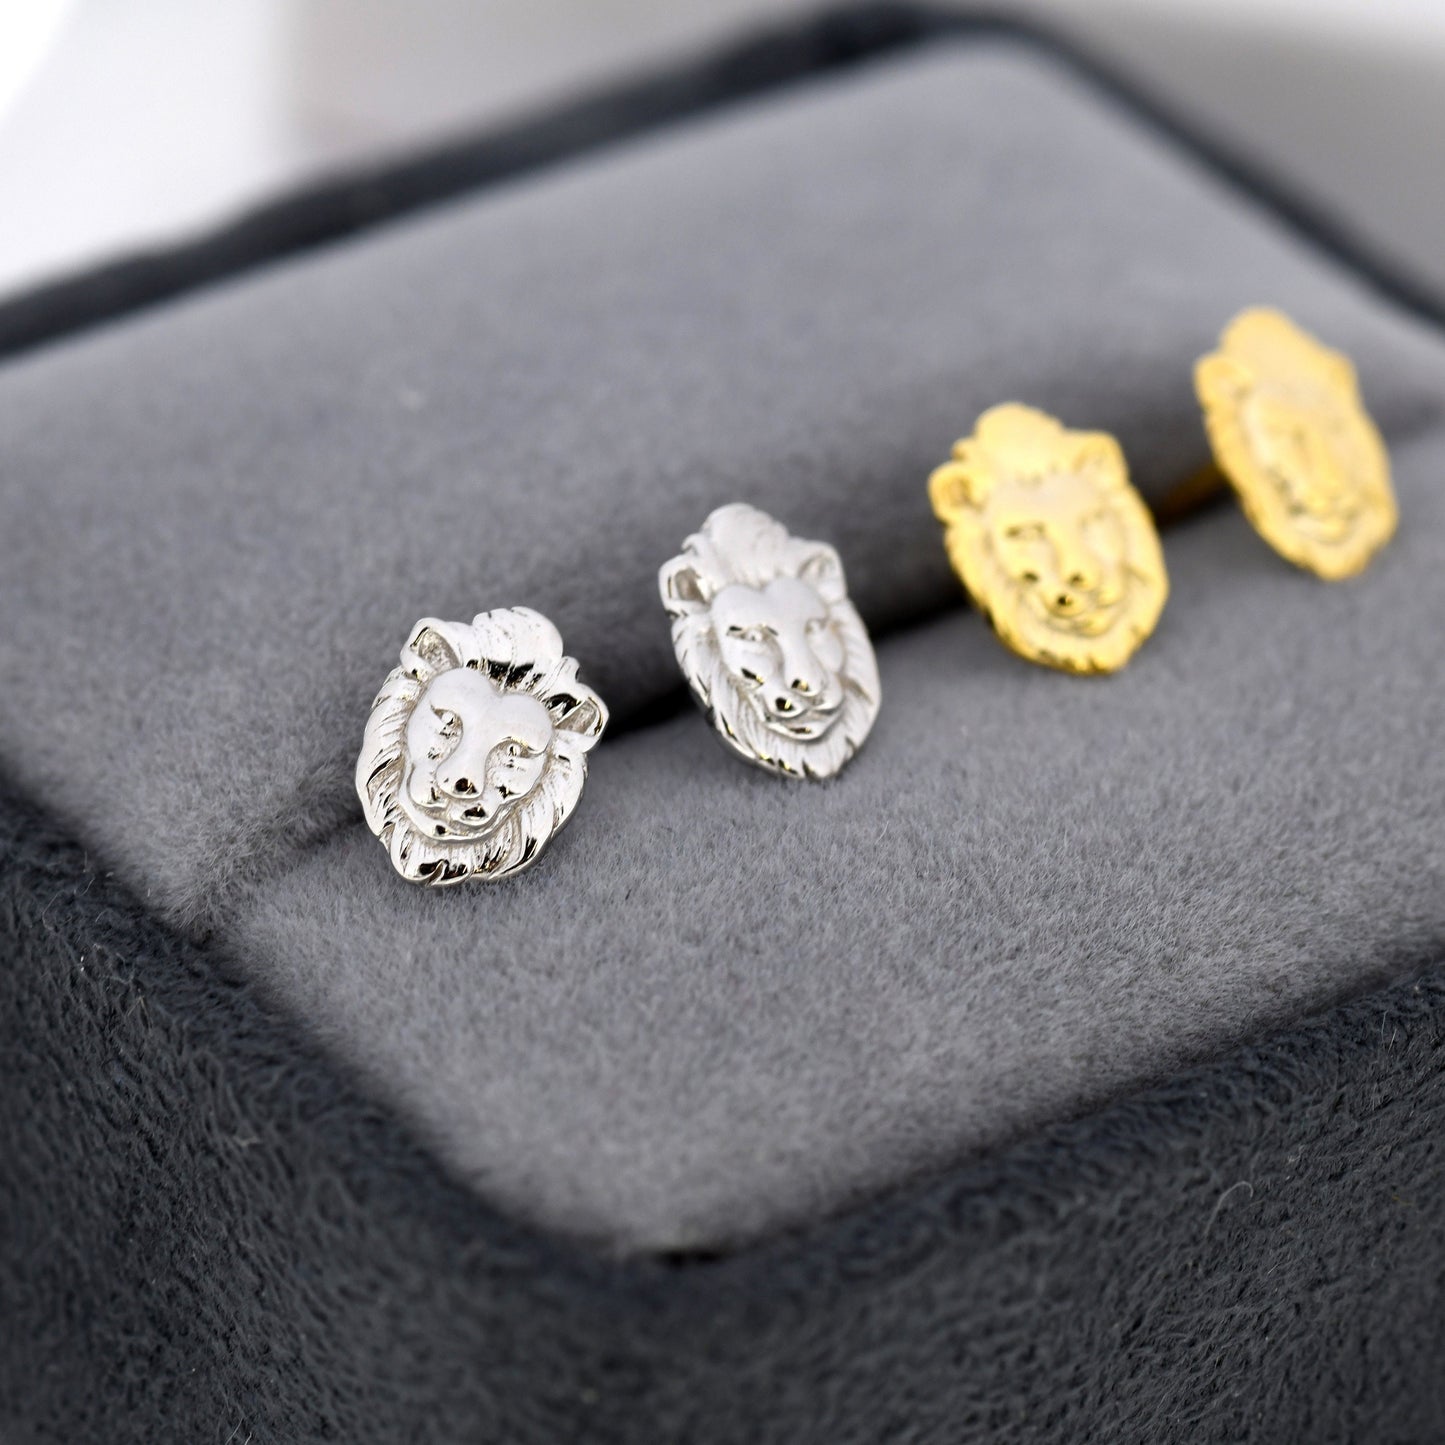 Lion Head Stud Earrings in Sterling Silver, Silver or Gold, Animal Earrings, Nature Inspired